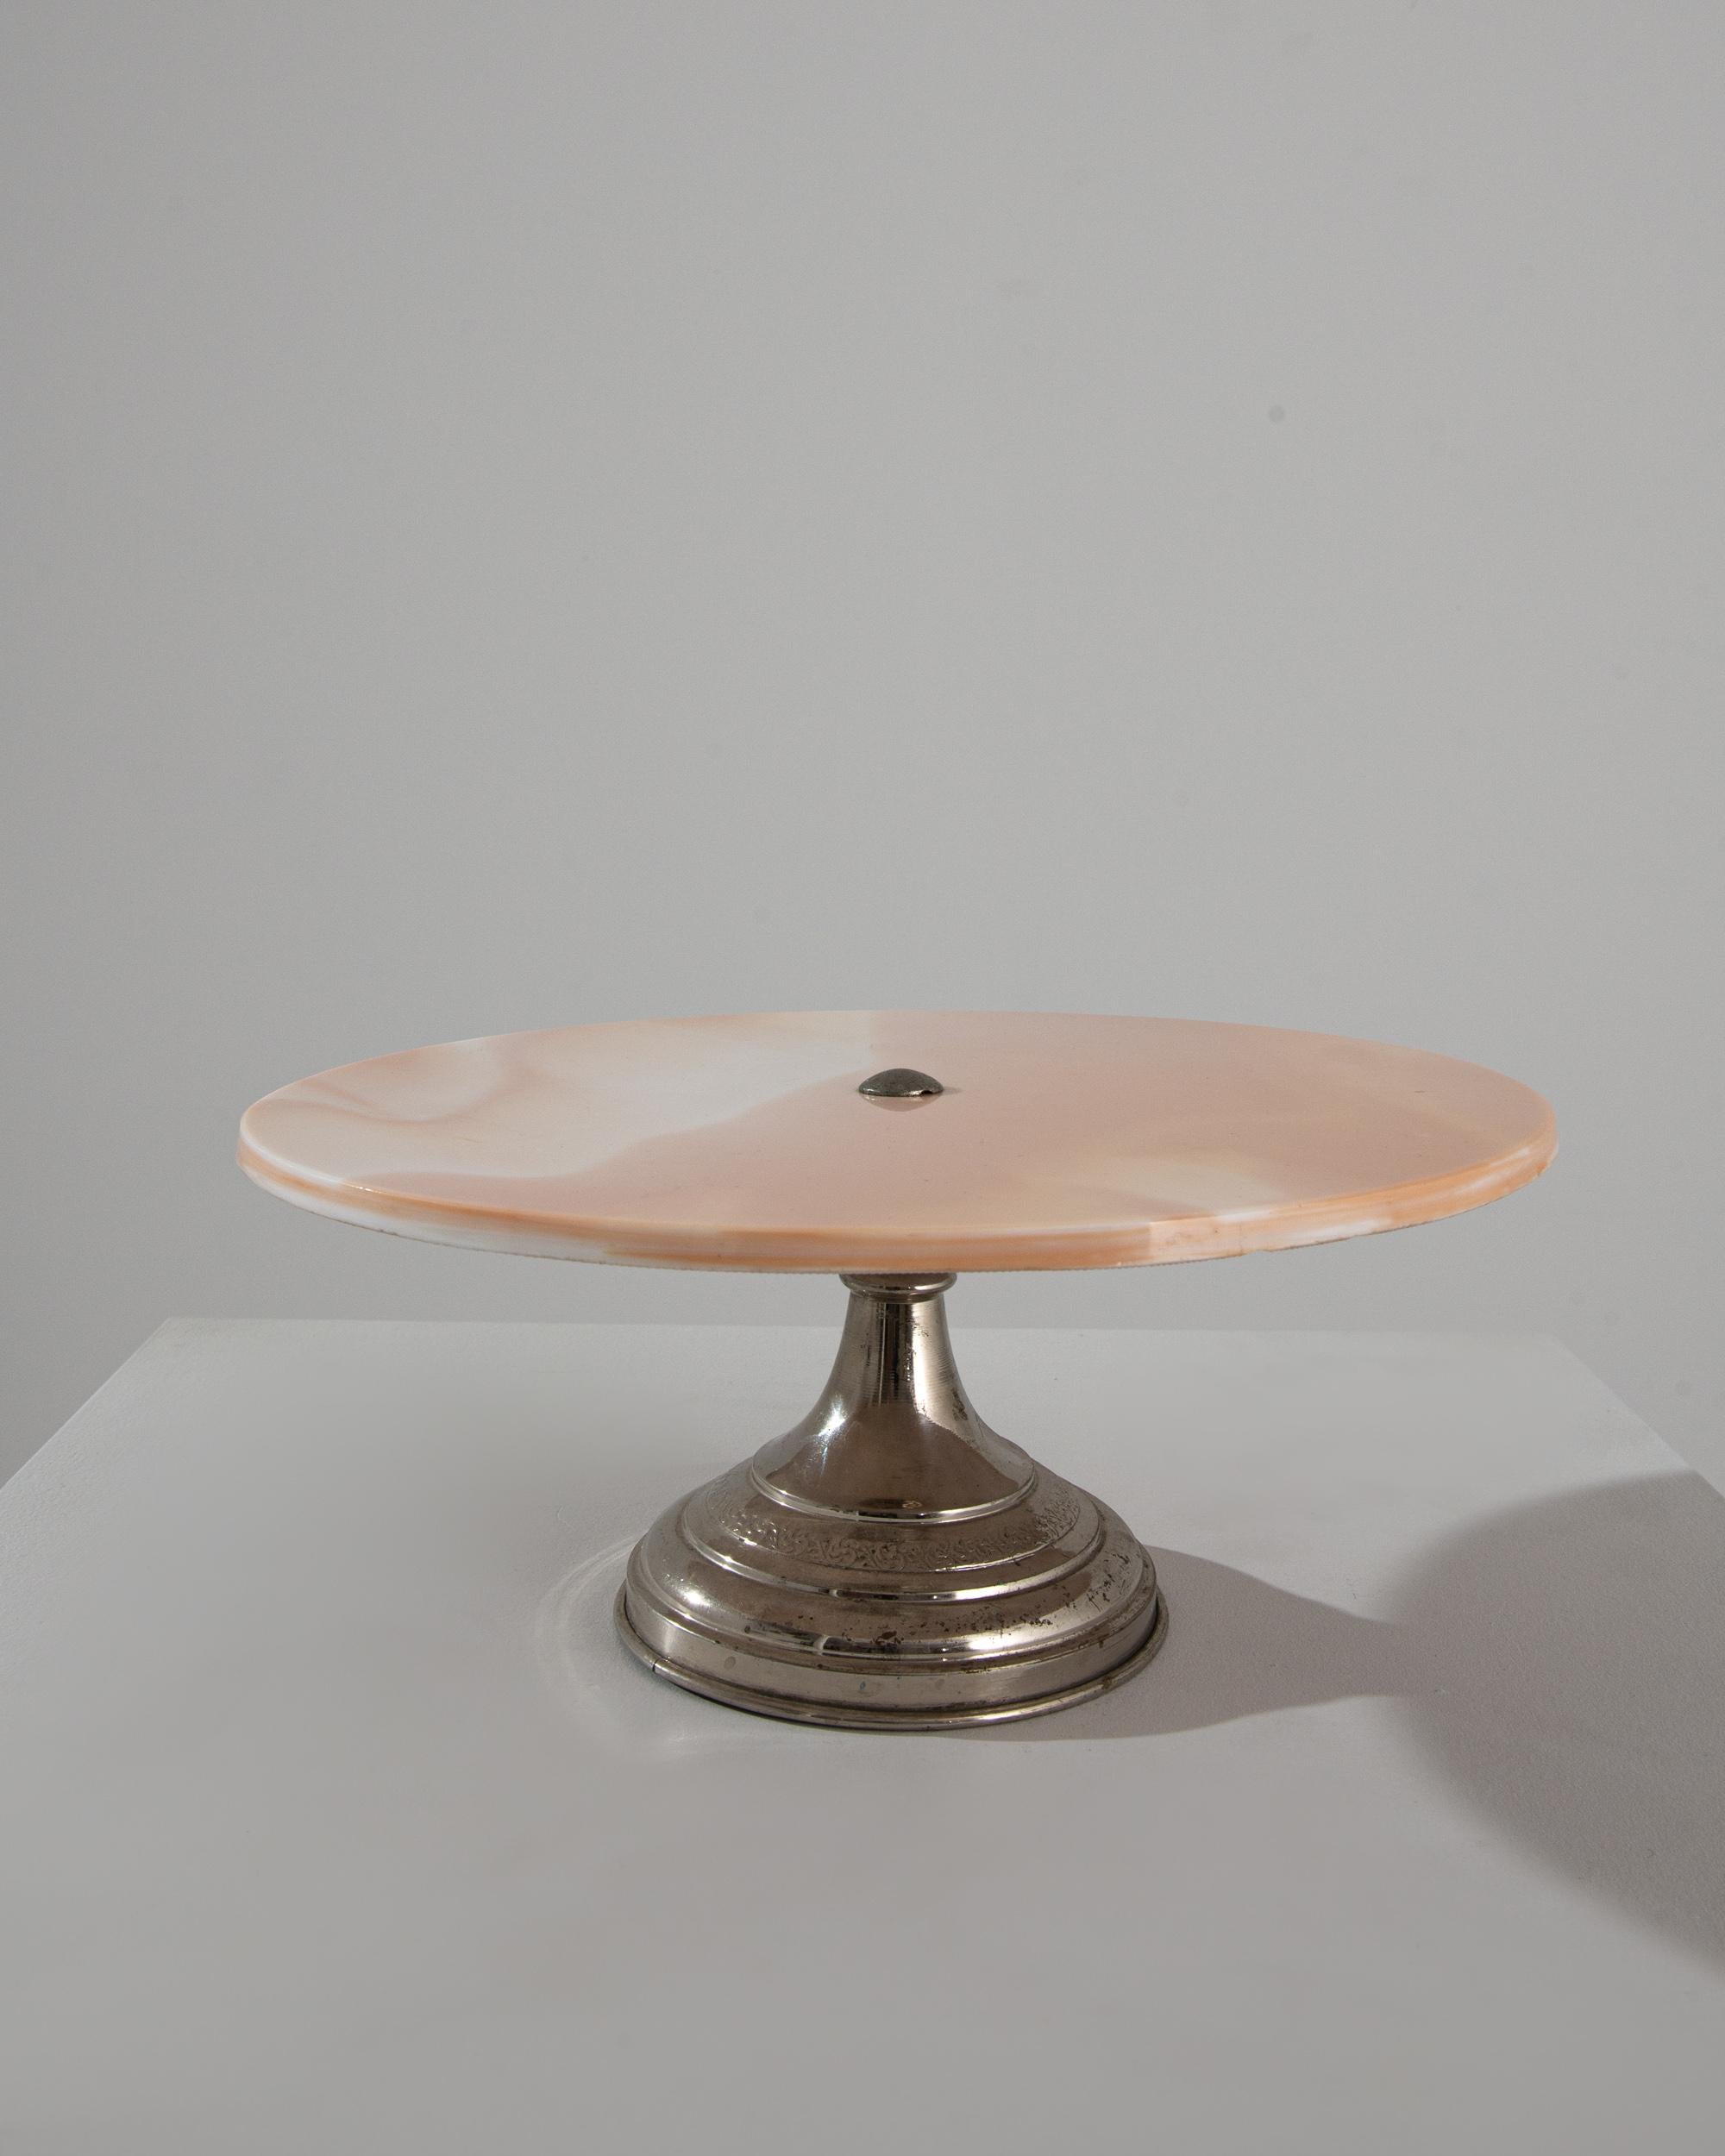 Dreamy and whimsical, this vintage cake tray is a delicious confection. Made in turn of the century Belgium, the design achieves a perfect balance of elegance and clarity: a simple circle of marble sits atop a silver-plated base. A raised motif of